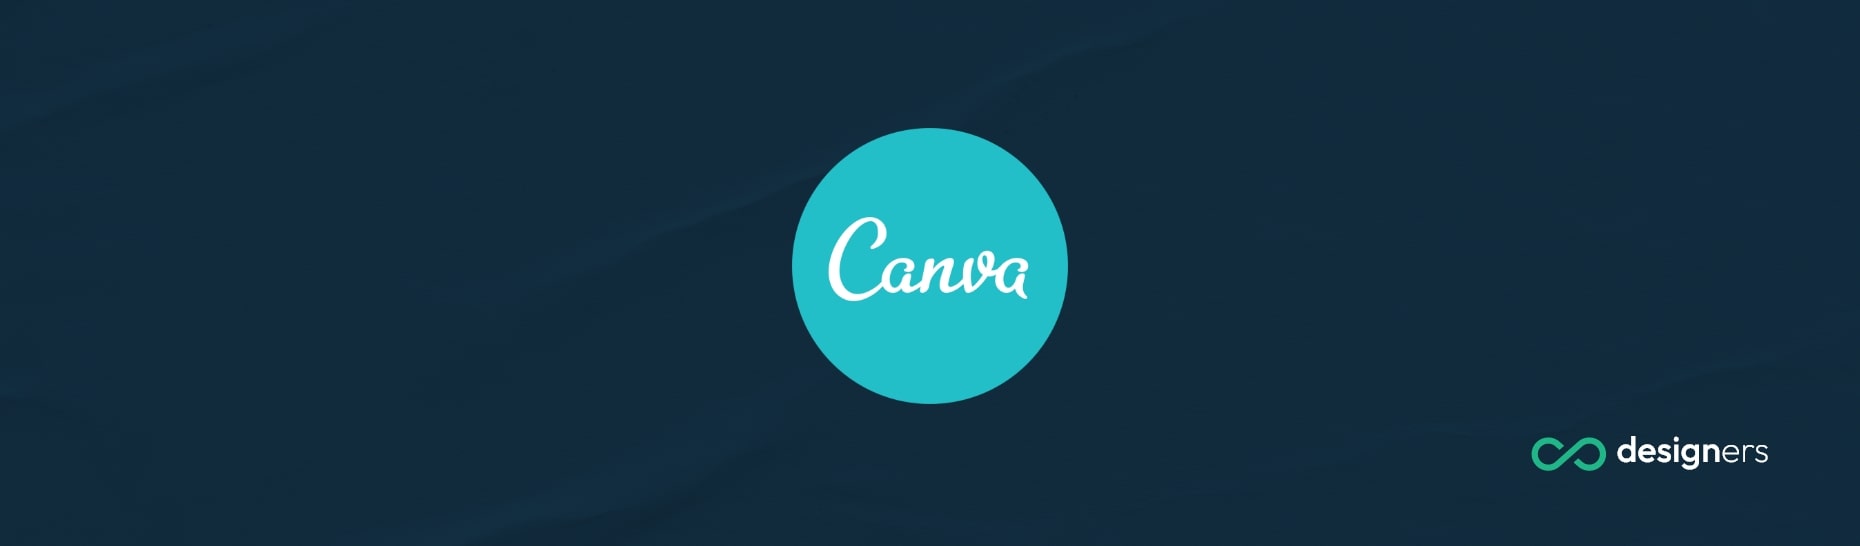 What Can I Make on Canva to Sell on Etsy?